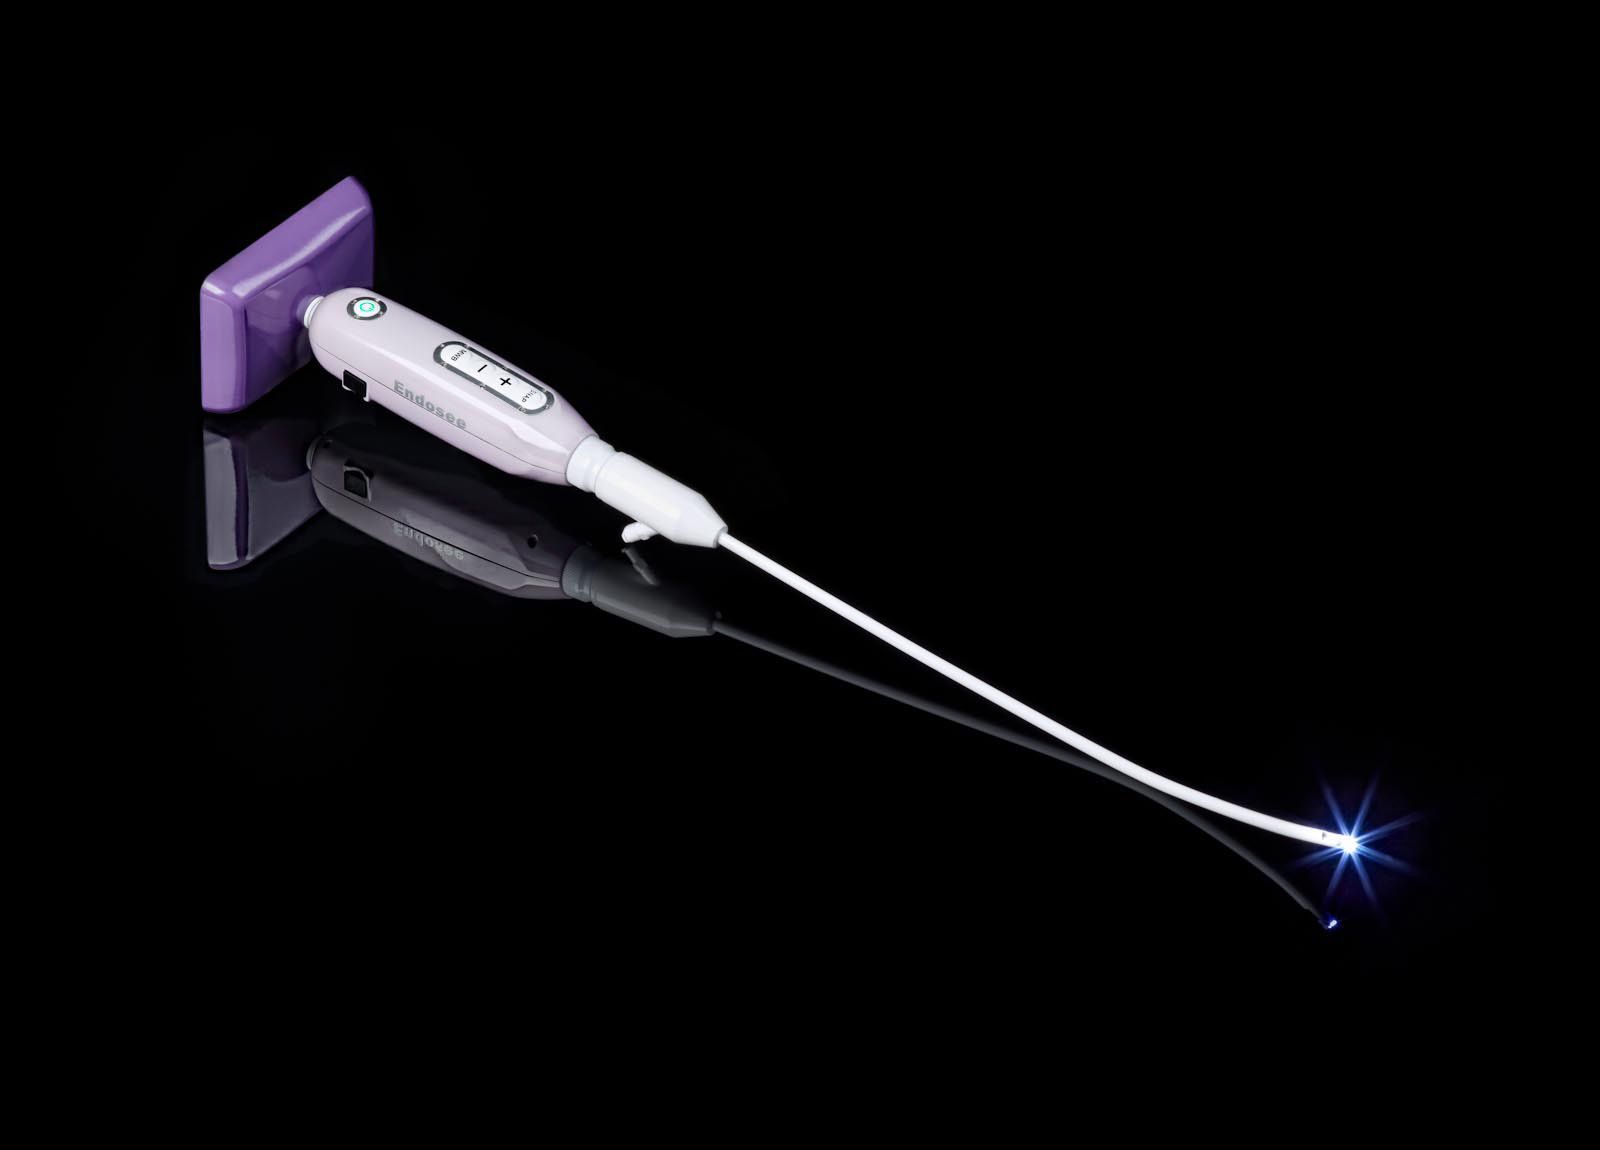 Hand-held Hysteroscopy Instrument Market To Witness Huge Growth By 2027 | Medtronic (Ireland), Ethicon (Scotland), B. Braun (Germany), Boston Scientific (US), MedGyn Products – KSU | The Sentinel Newspaper